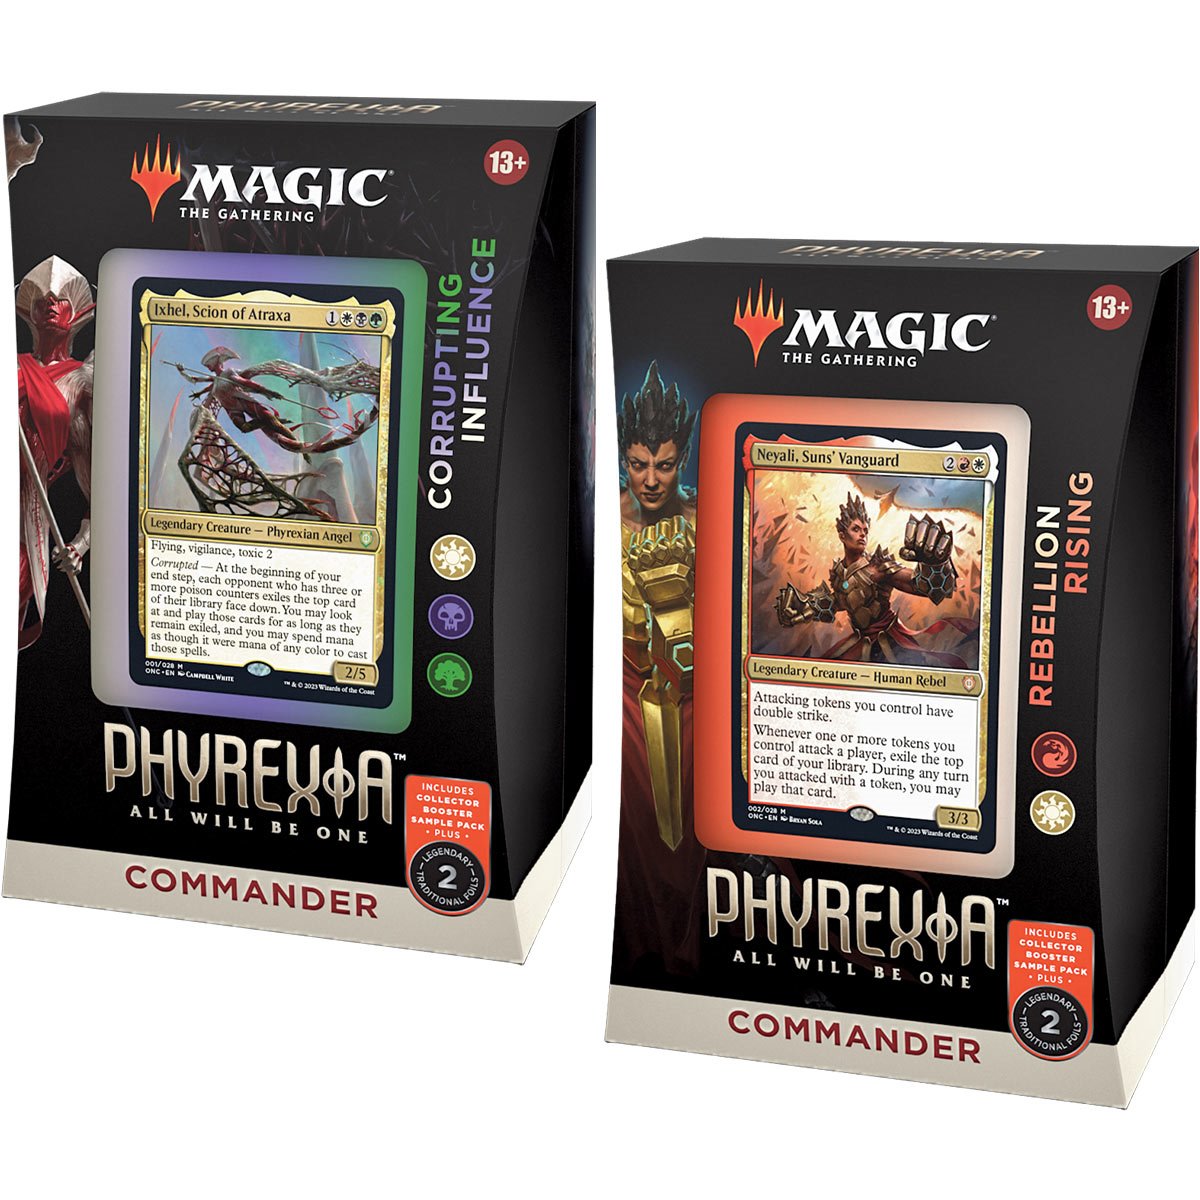 Magic: The Gathering's new Commander decks are a good thing for